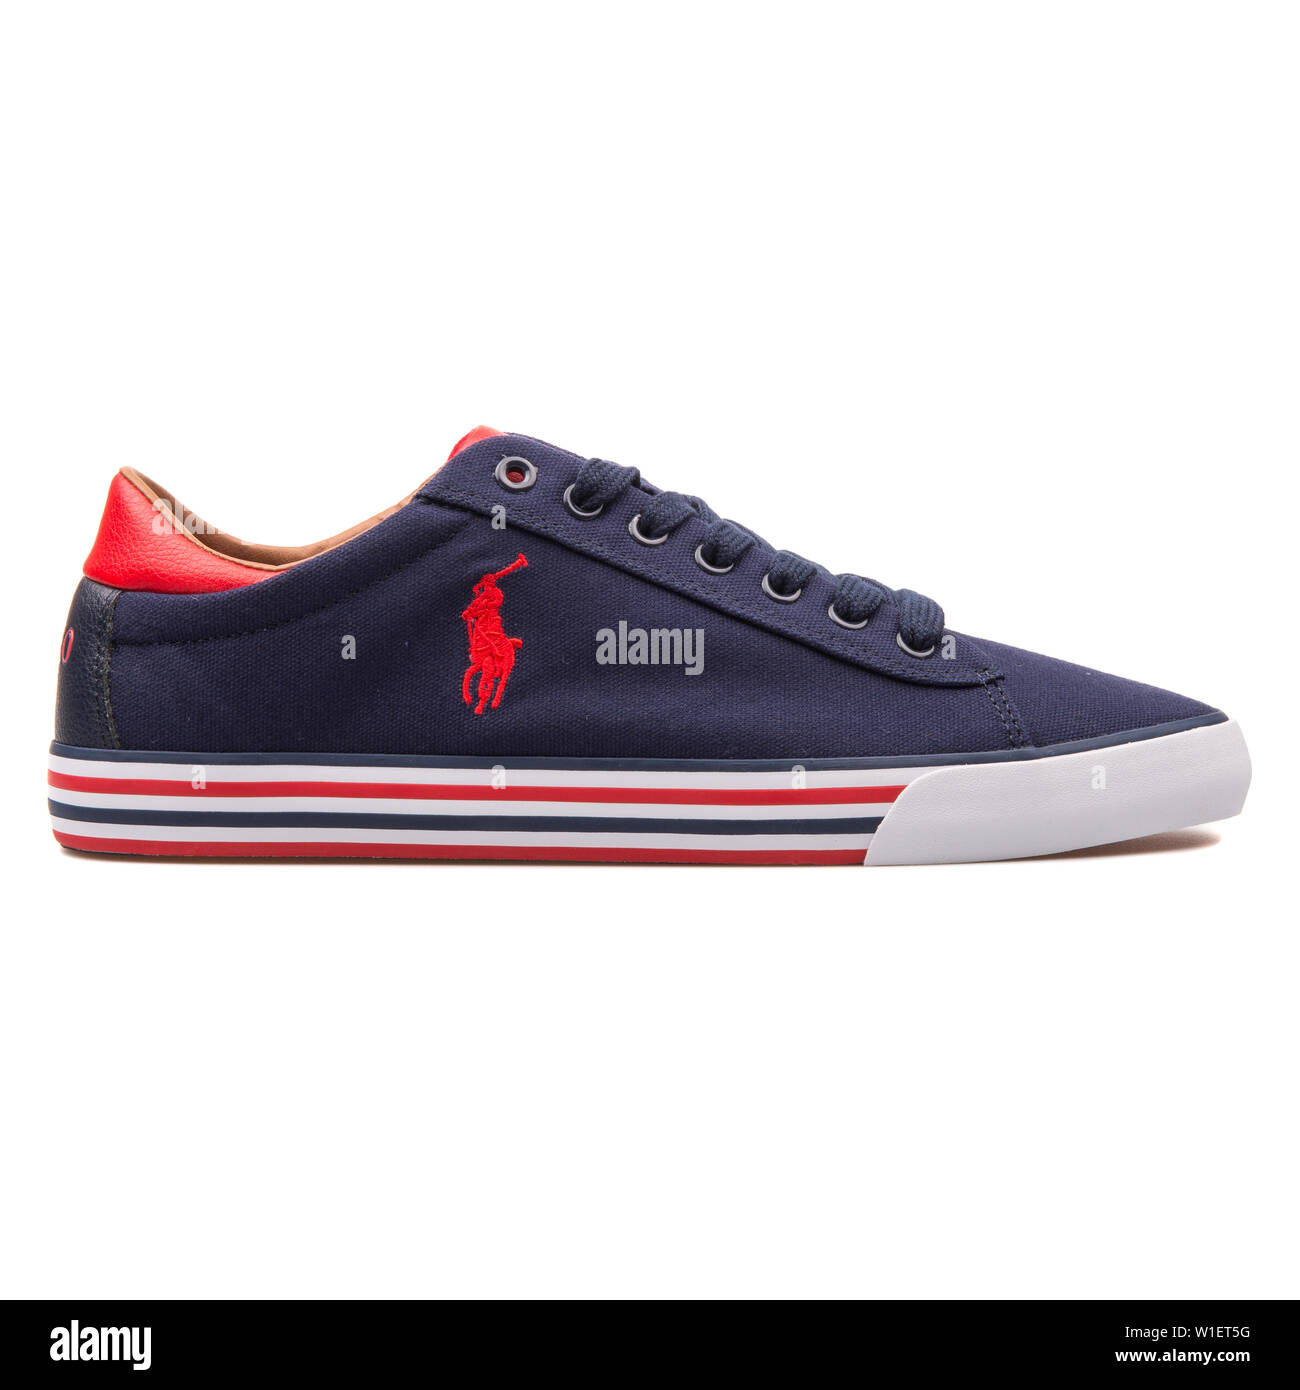 VIENNA, AUSTRIA - AUGUST 10, 2017: Polo Ralph Lauren Harvey navy blue and  red sneaker on white background Stock Photo - Alamy